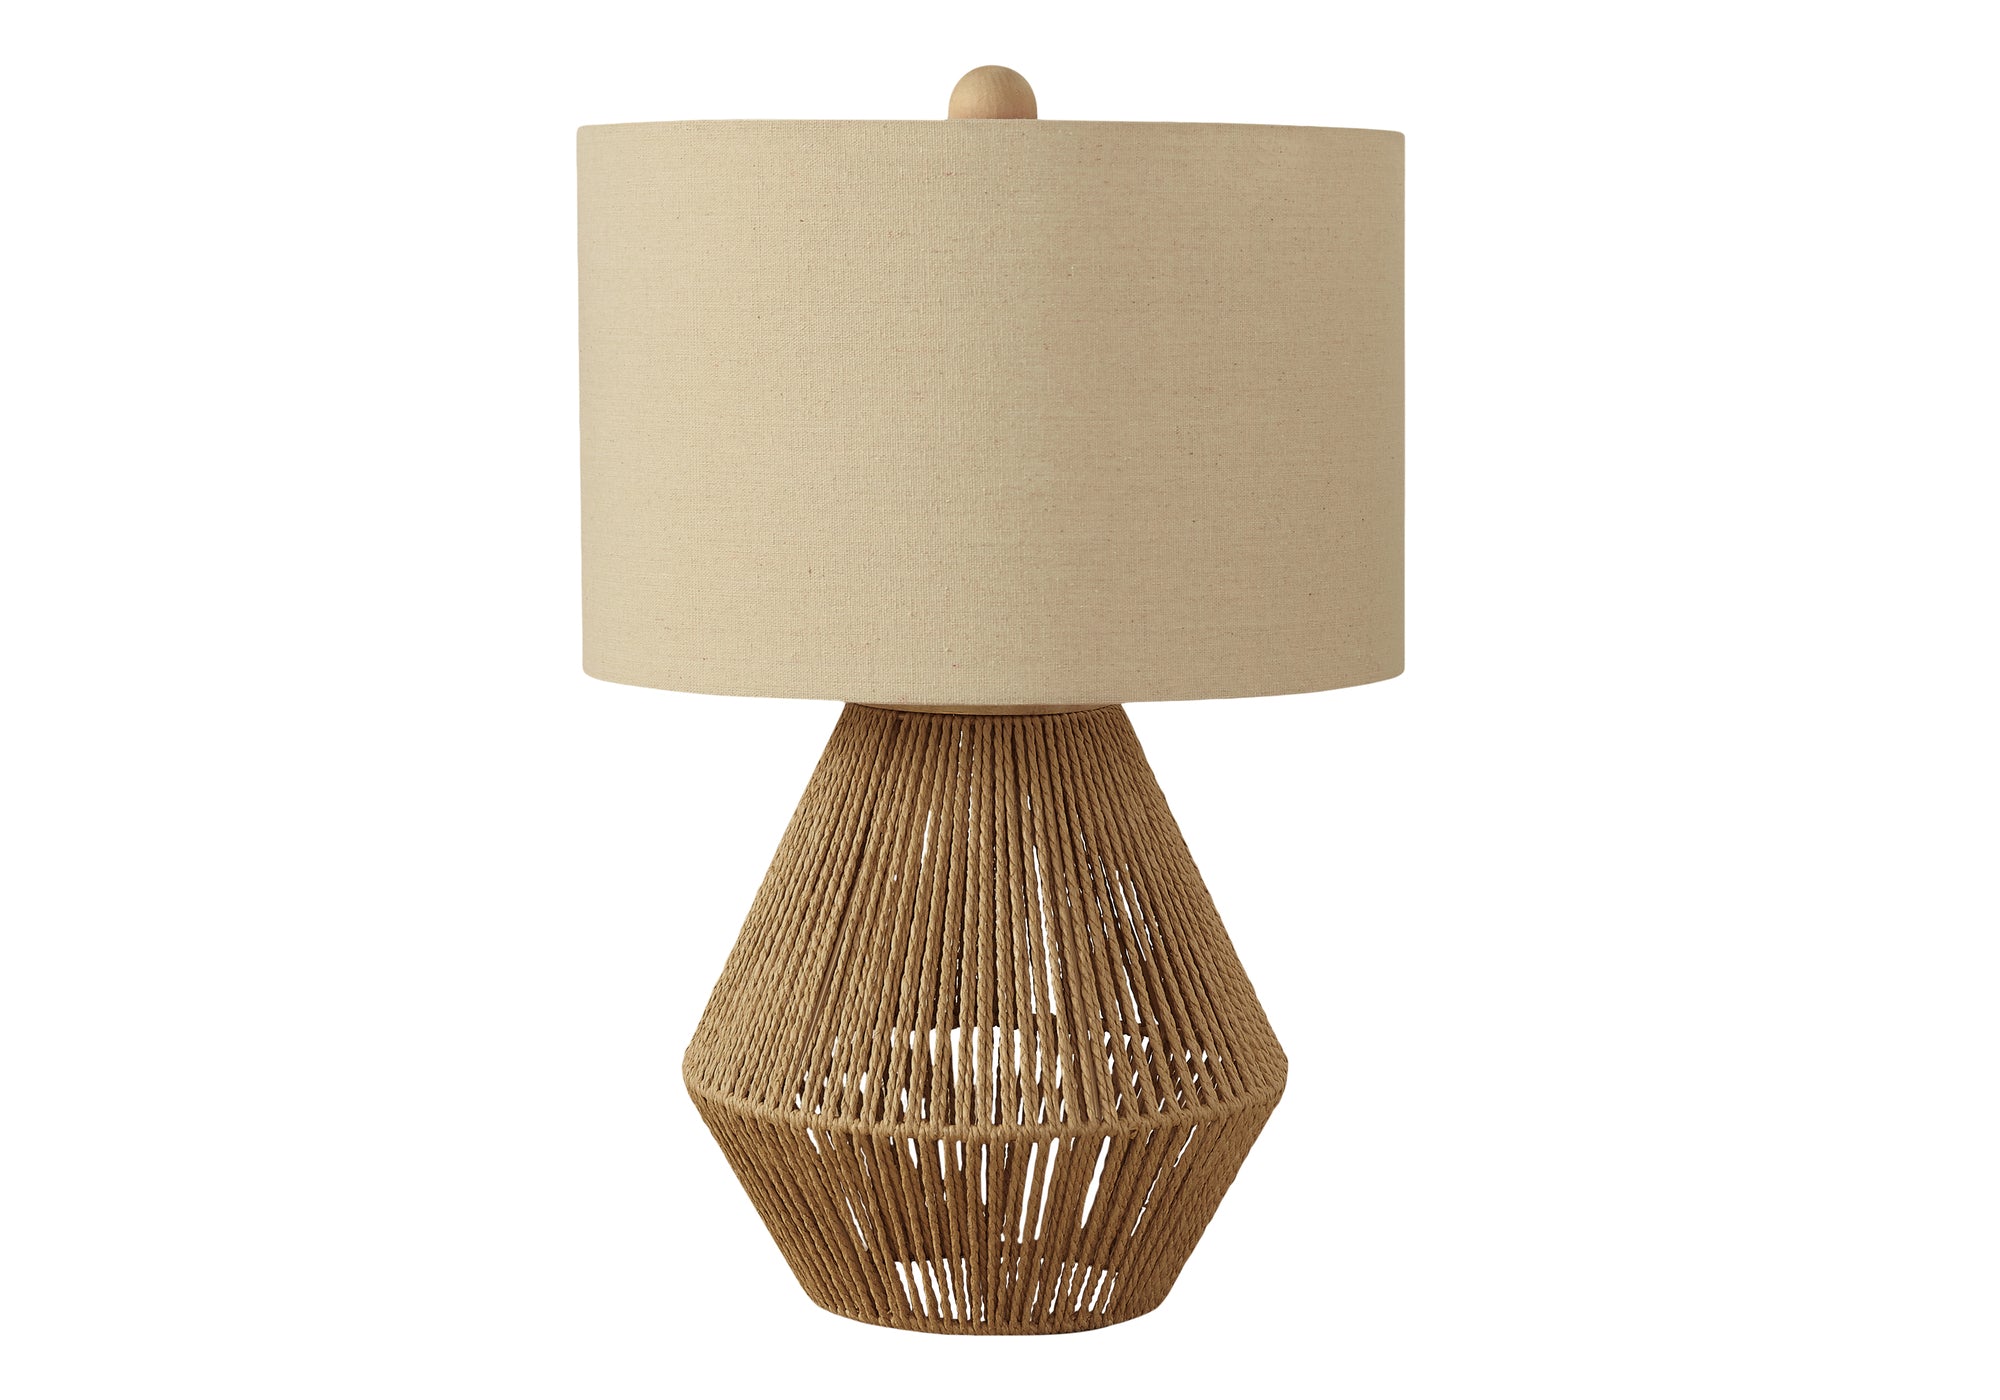 MN-109628    Lighting, 22"H, Table Lamp, Brown Rope, Beige Shade, Transitional